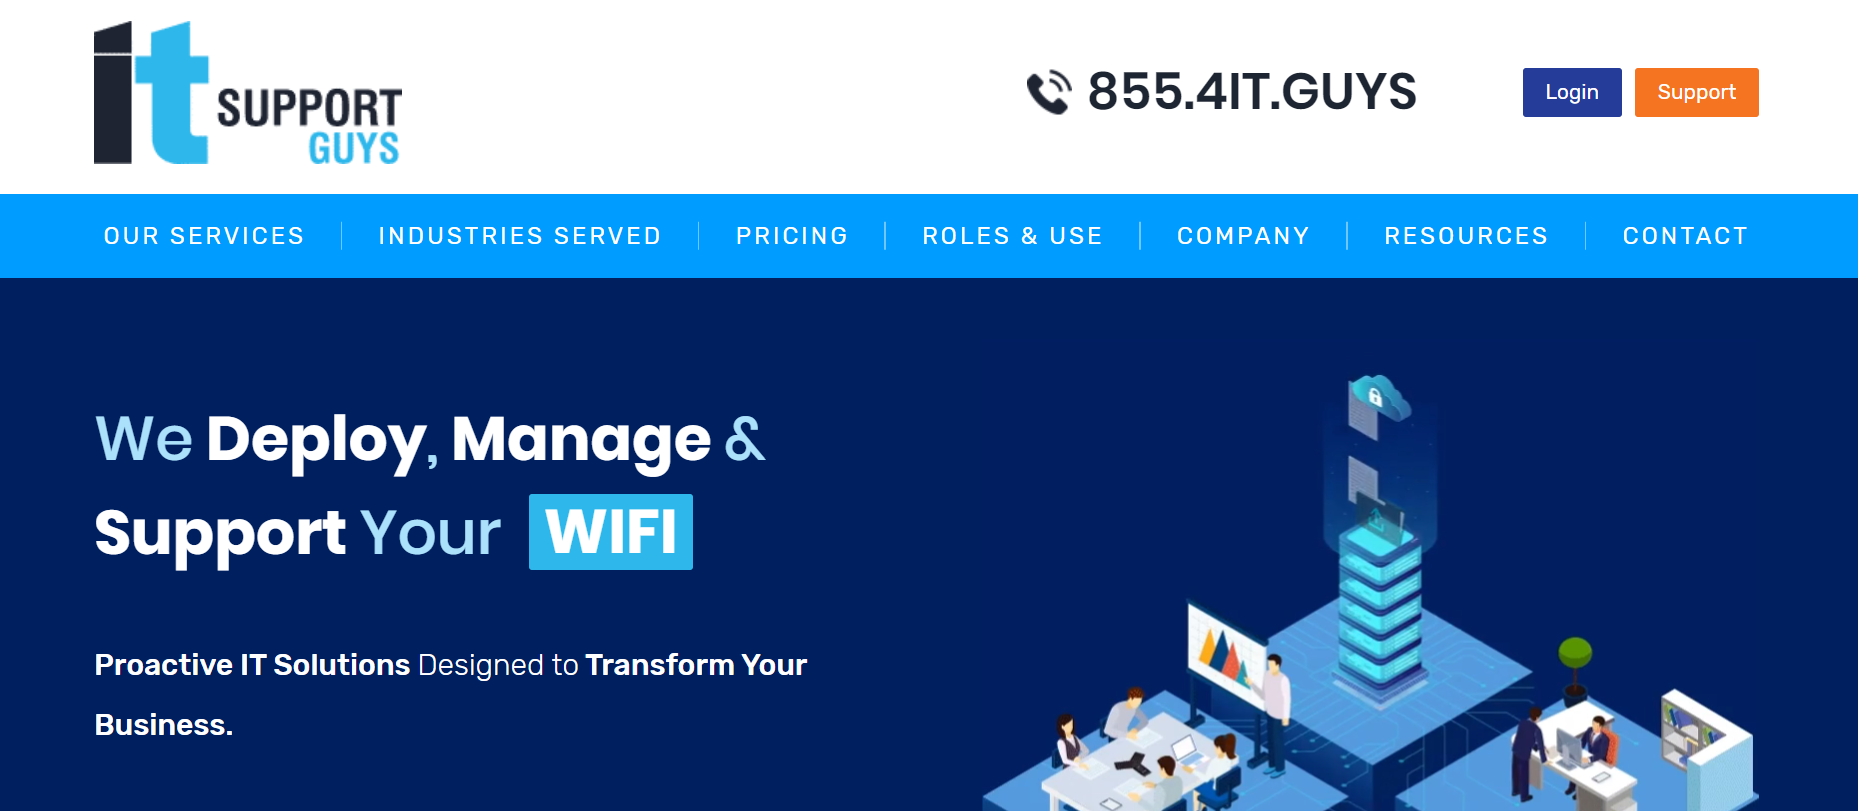 IT Support Guys homepage: We deploy, manage & support your WIFI. 